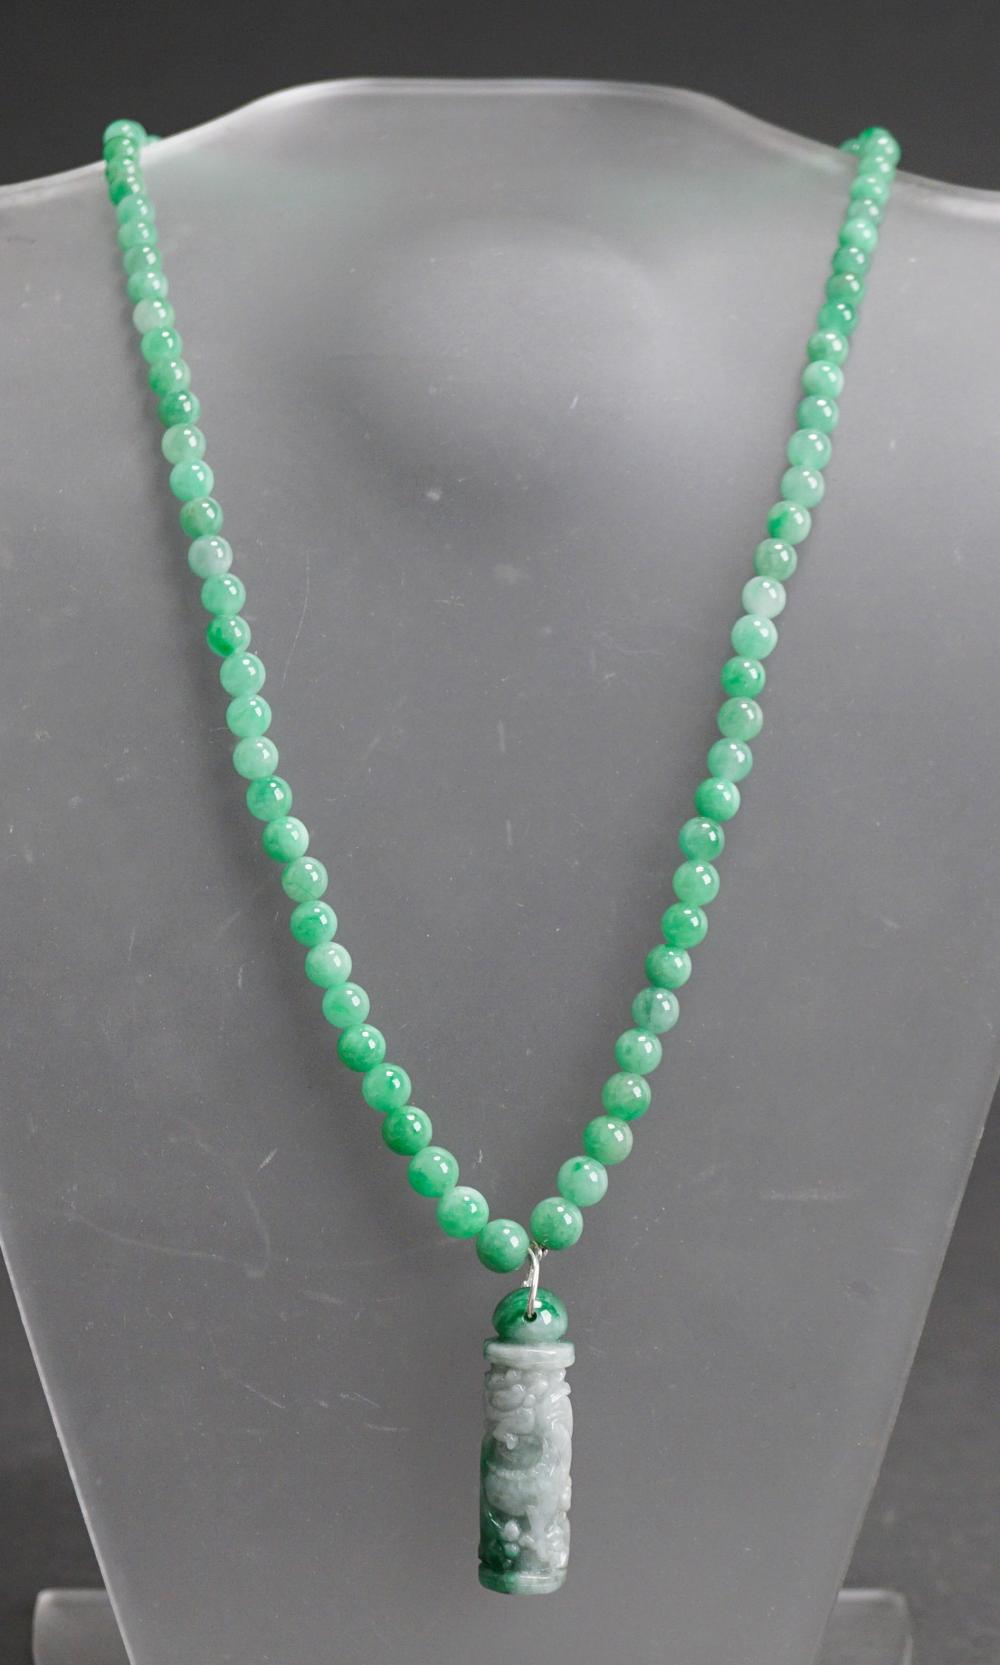 JADE BEAD NECKLACE WITH A CARVED 2e4f4b